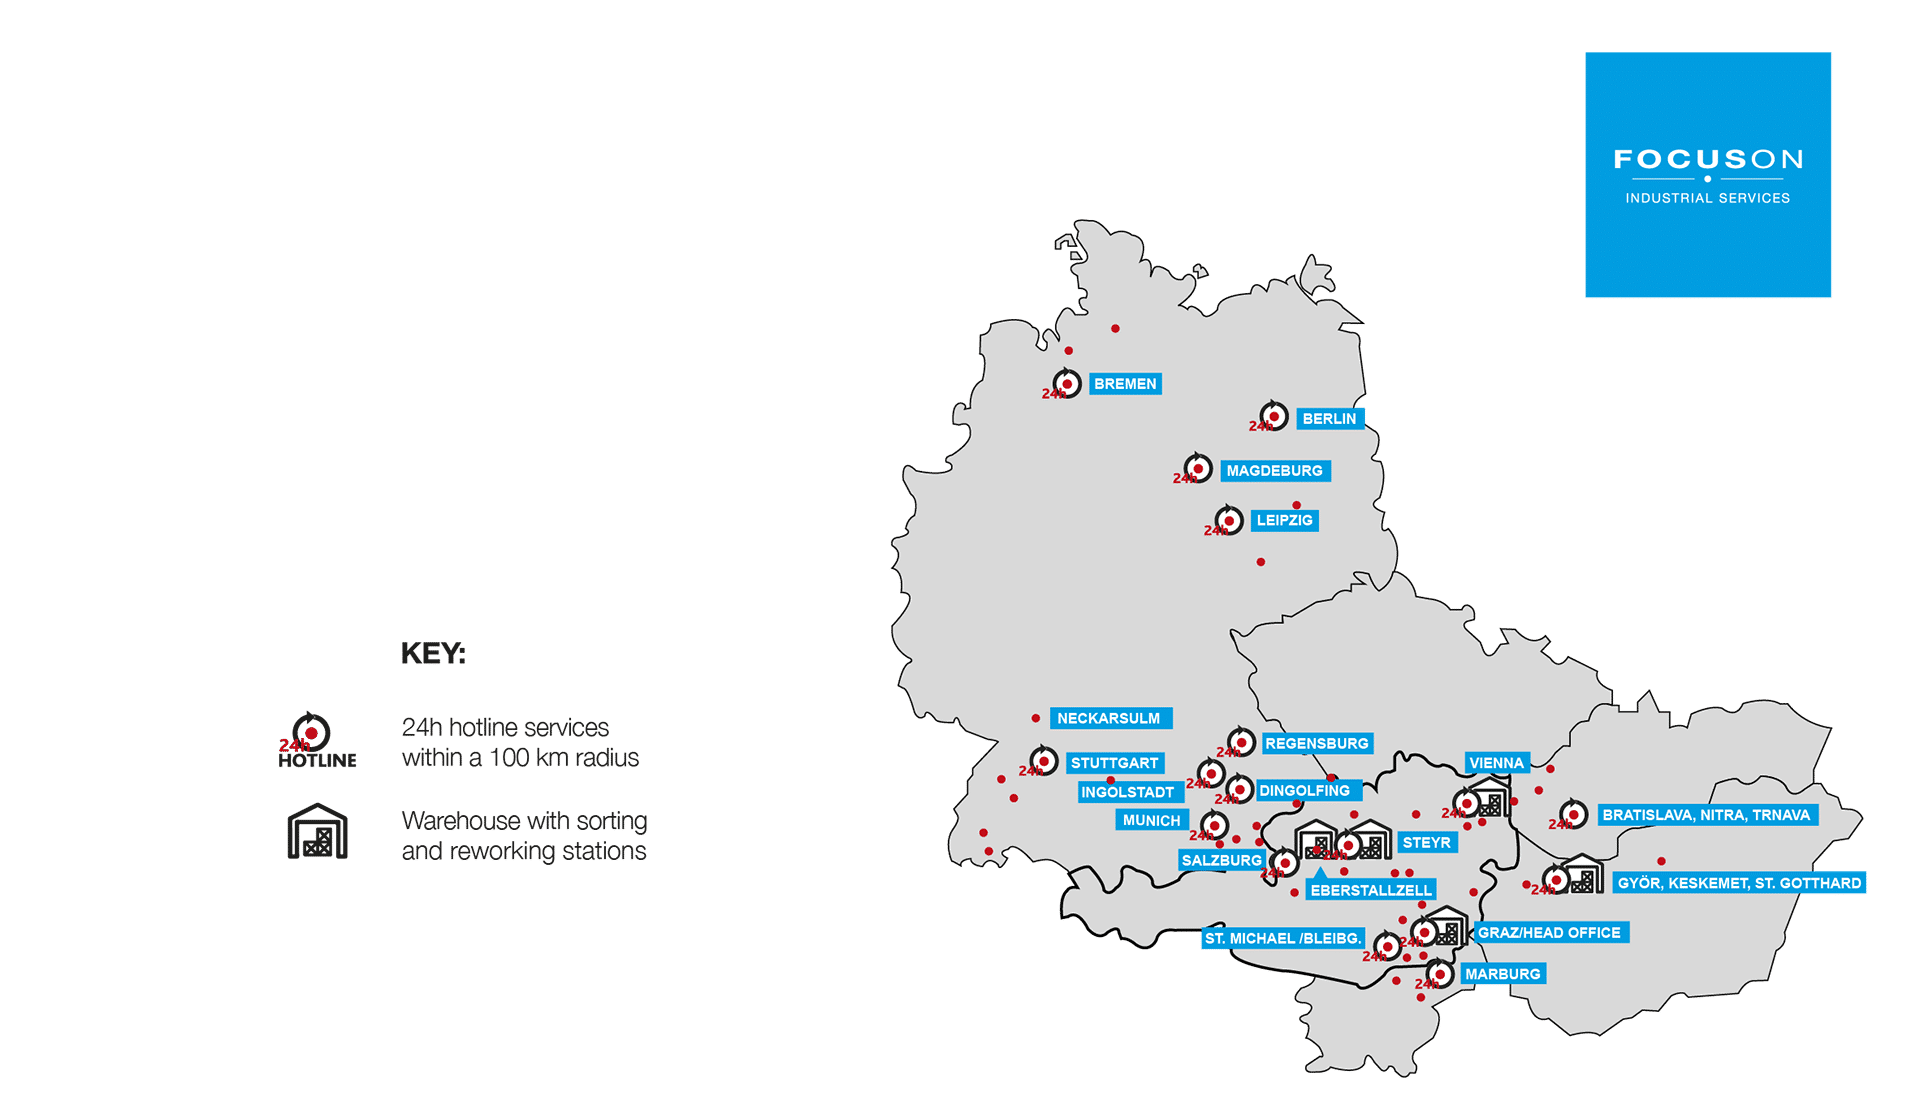 Map showing the locations of FOCUSON Industrial Services across Germany and Austria. The map includes 24-hour hotline service areas within a 100 km radius and warehouses with sorting and reworking stations. Key cities highlighted include Bremen, Berlin, Magdeburg, Leipzig, Neckarsulm, Stuttgart, Ingolstadt, Munich, Regensburg, Dingolfing, Salzburg, Vienna, Graz, Marburg, Bratislava, Nitra, Trnava, Győr, Kecskemét, and St. Gotthard. The head office is located in Graz.